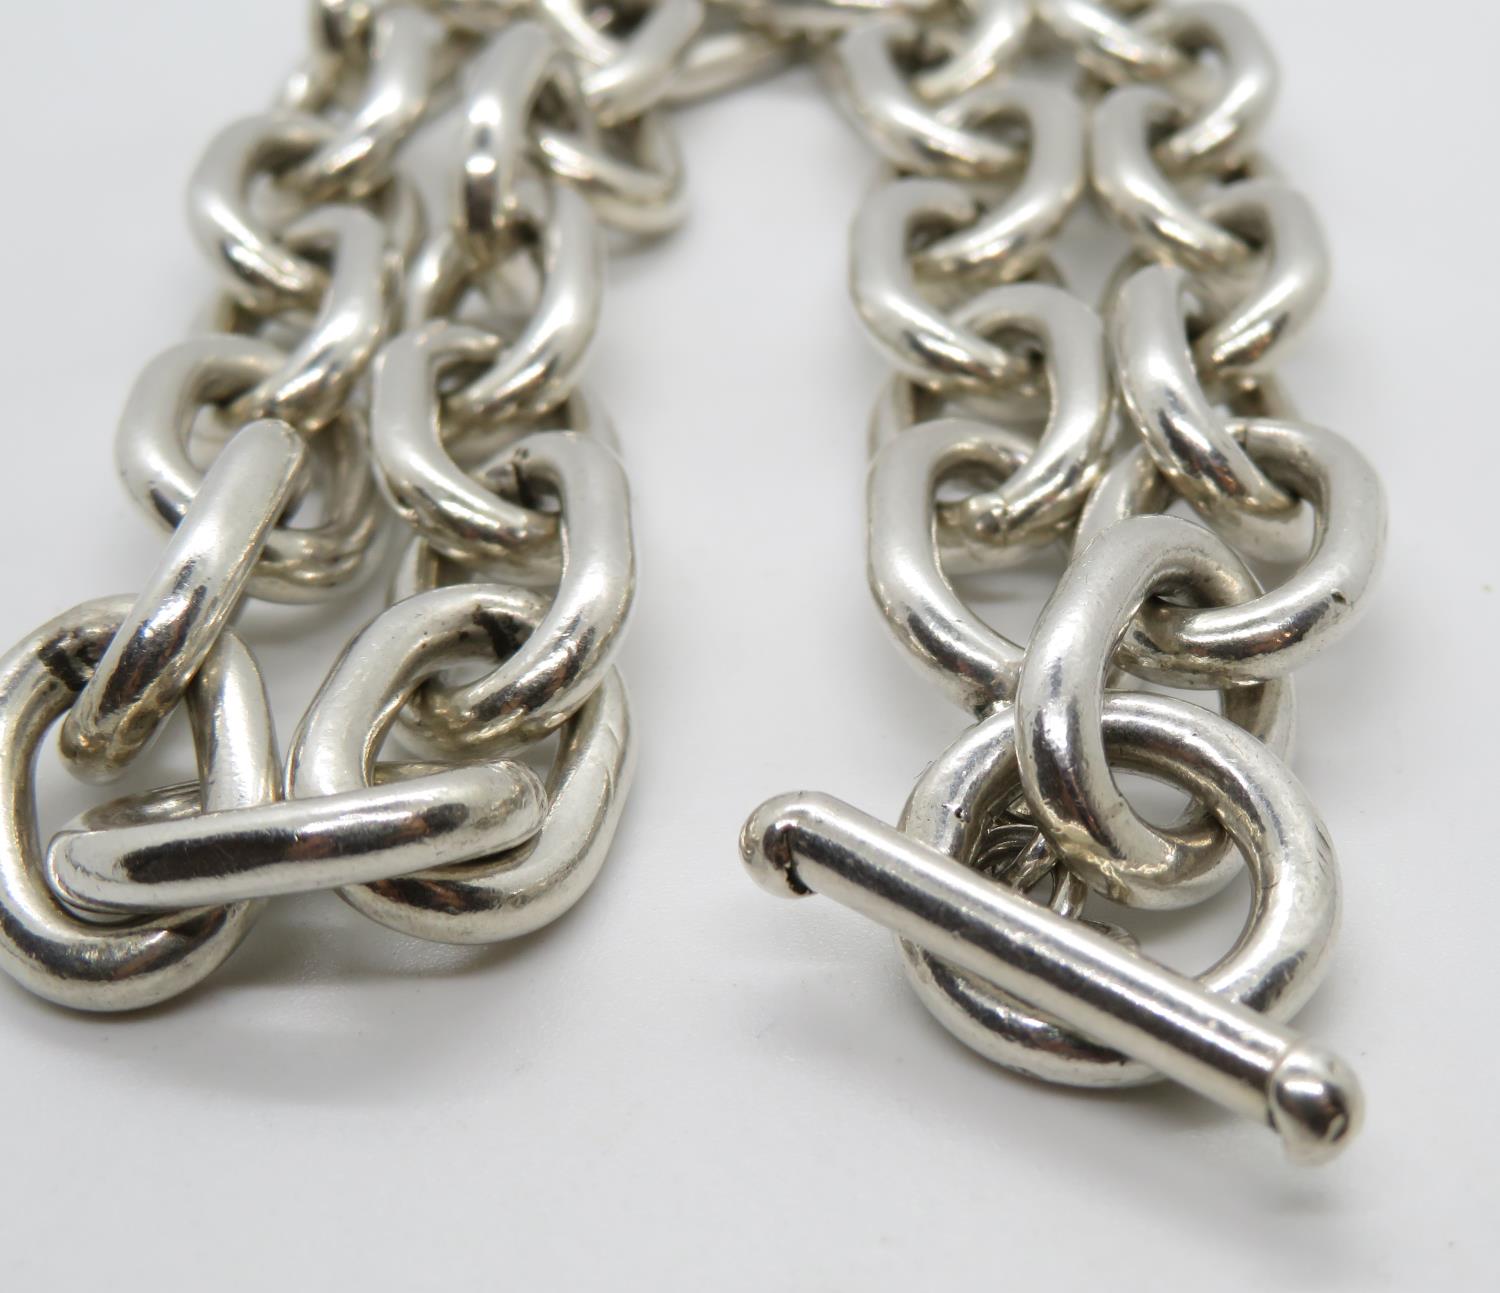 Vintage solid silver trace link chain 18" 125g - Image 2 of 2